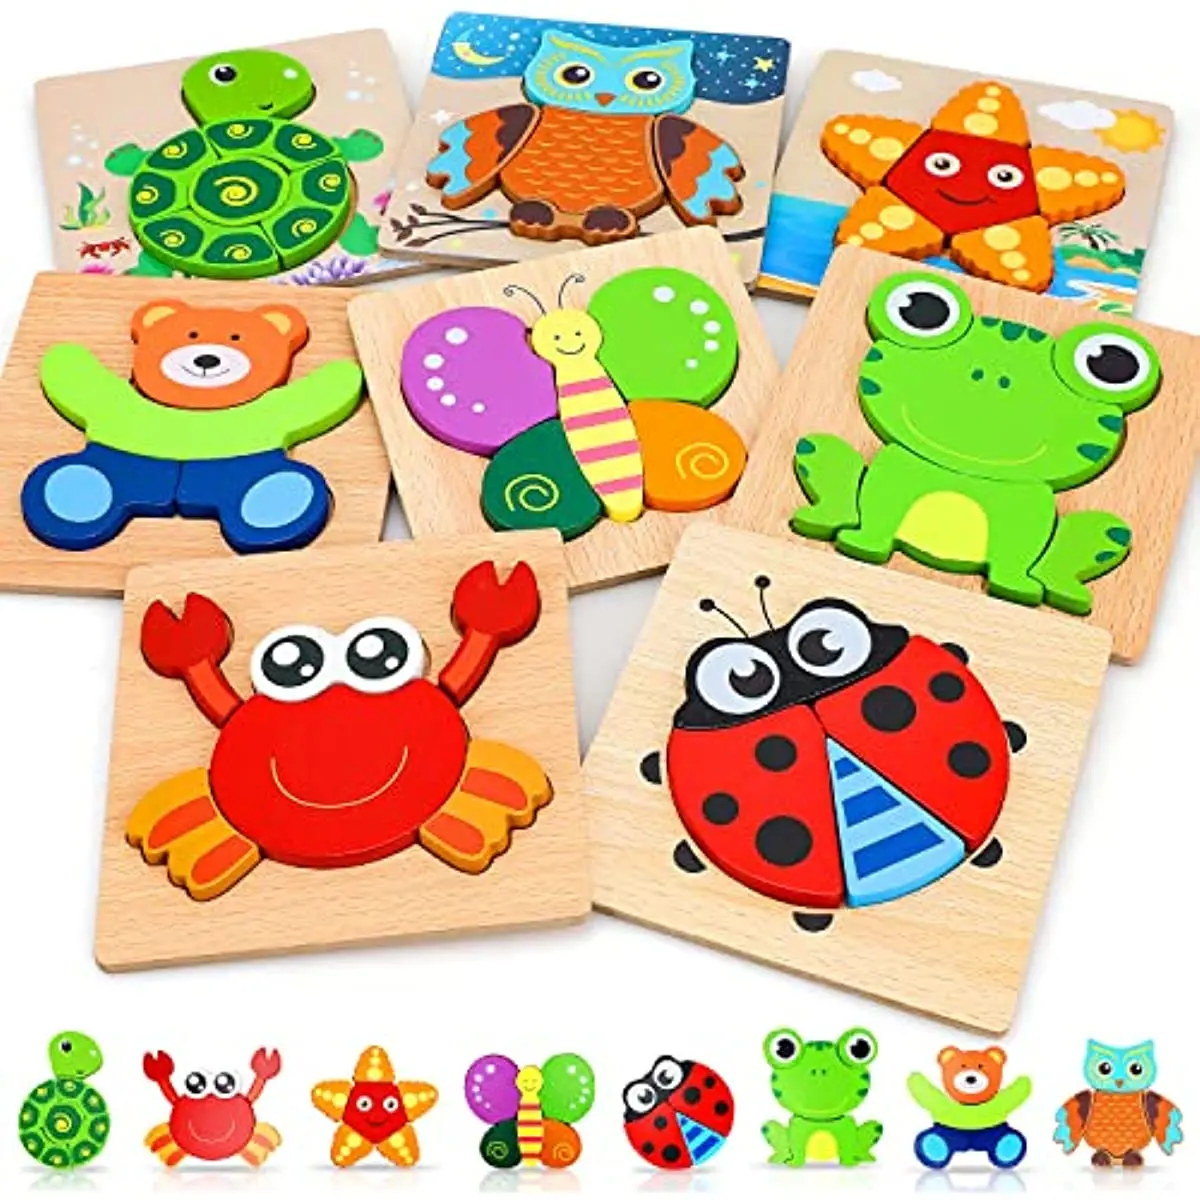 

Montessori Wooden 3D Puzzle Cartoon Animals Early Learning Cognition Intelligence Puzzle Game Early Educational Toys for Kids